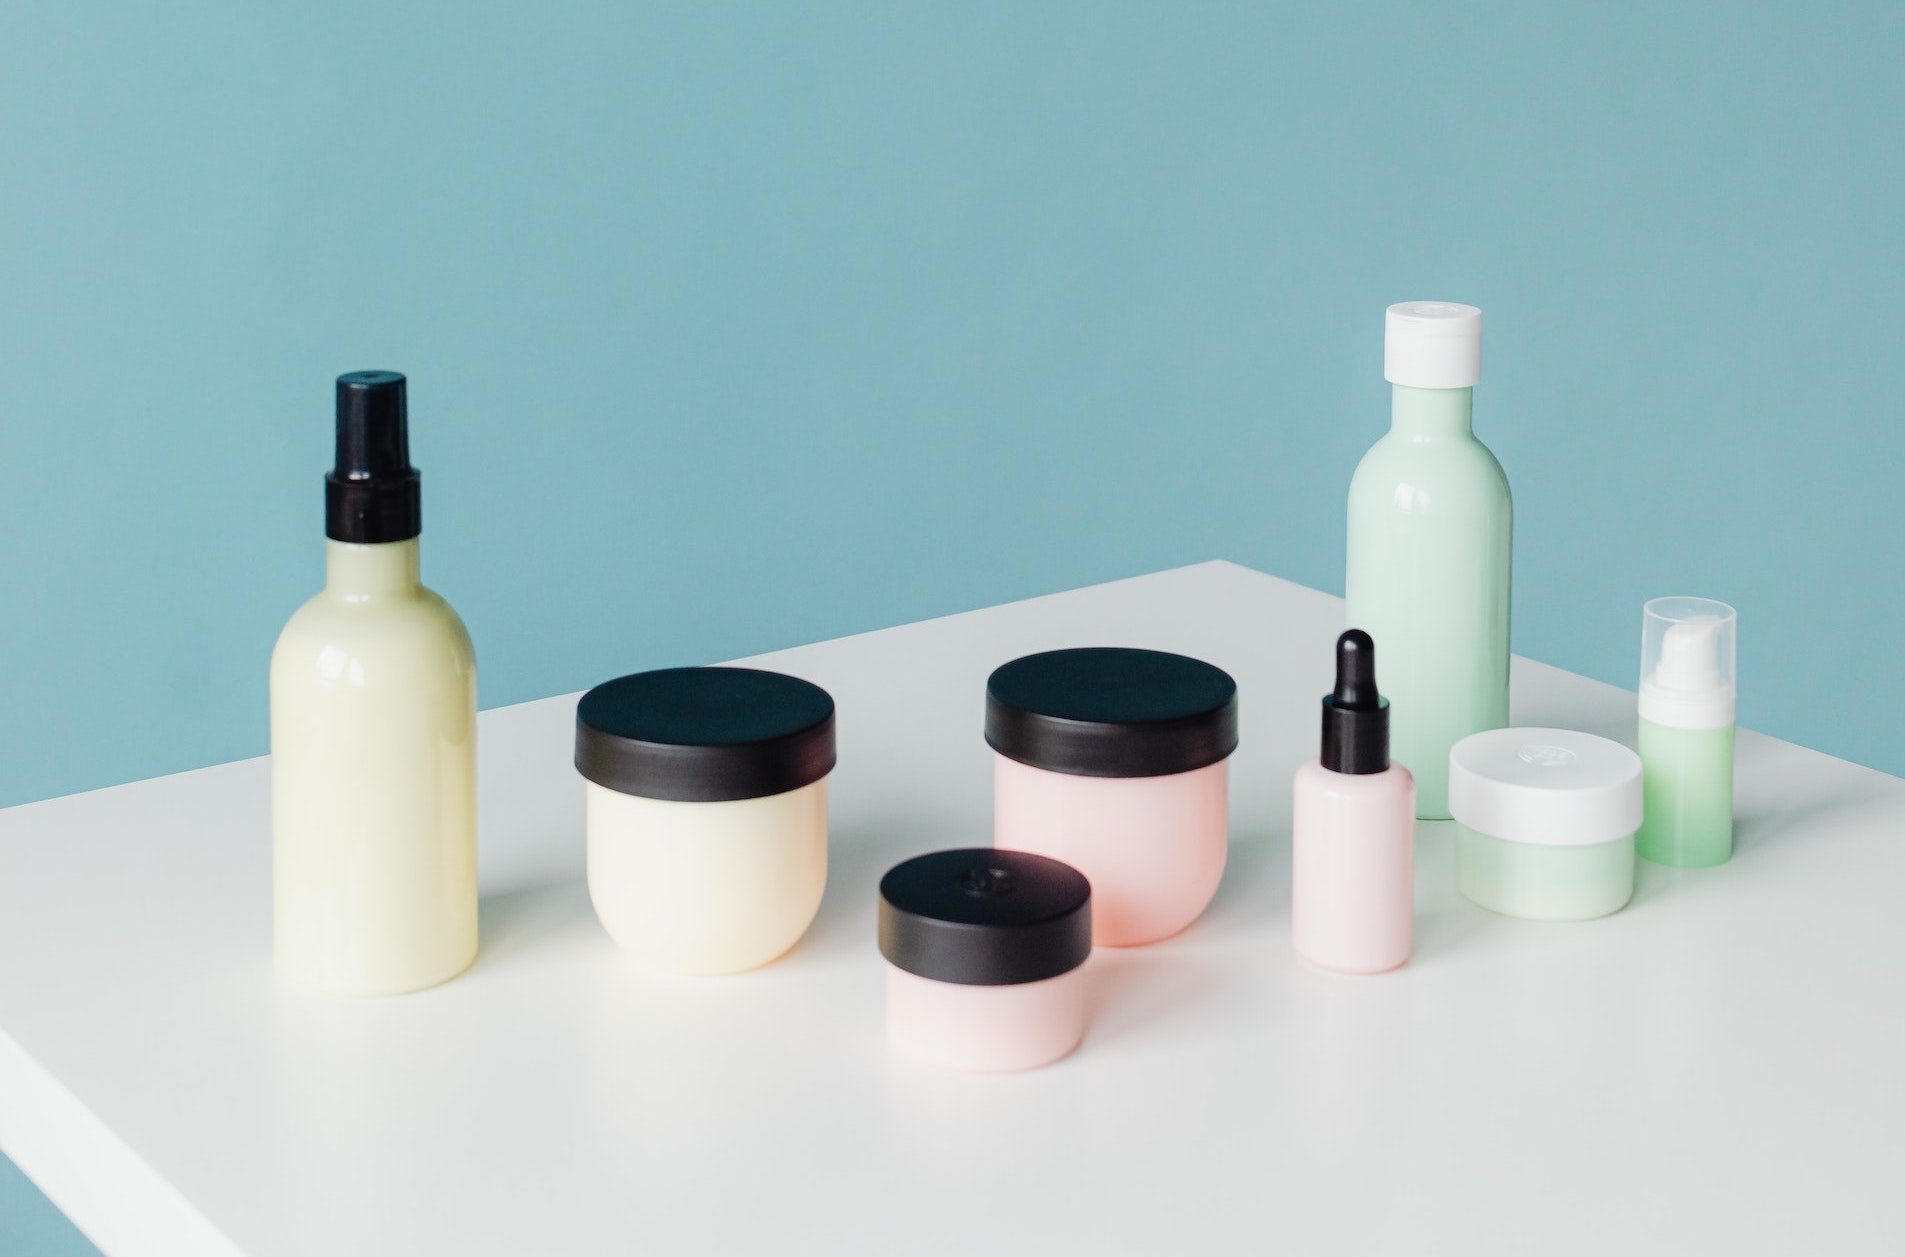 Multi-use skincare products? We’ve got you covered!